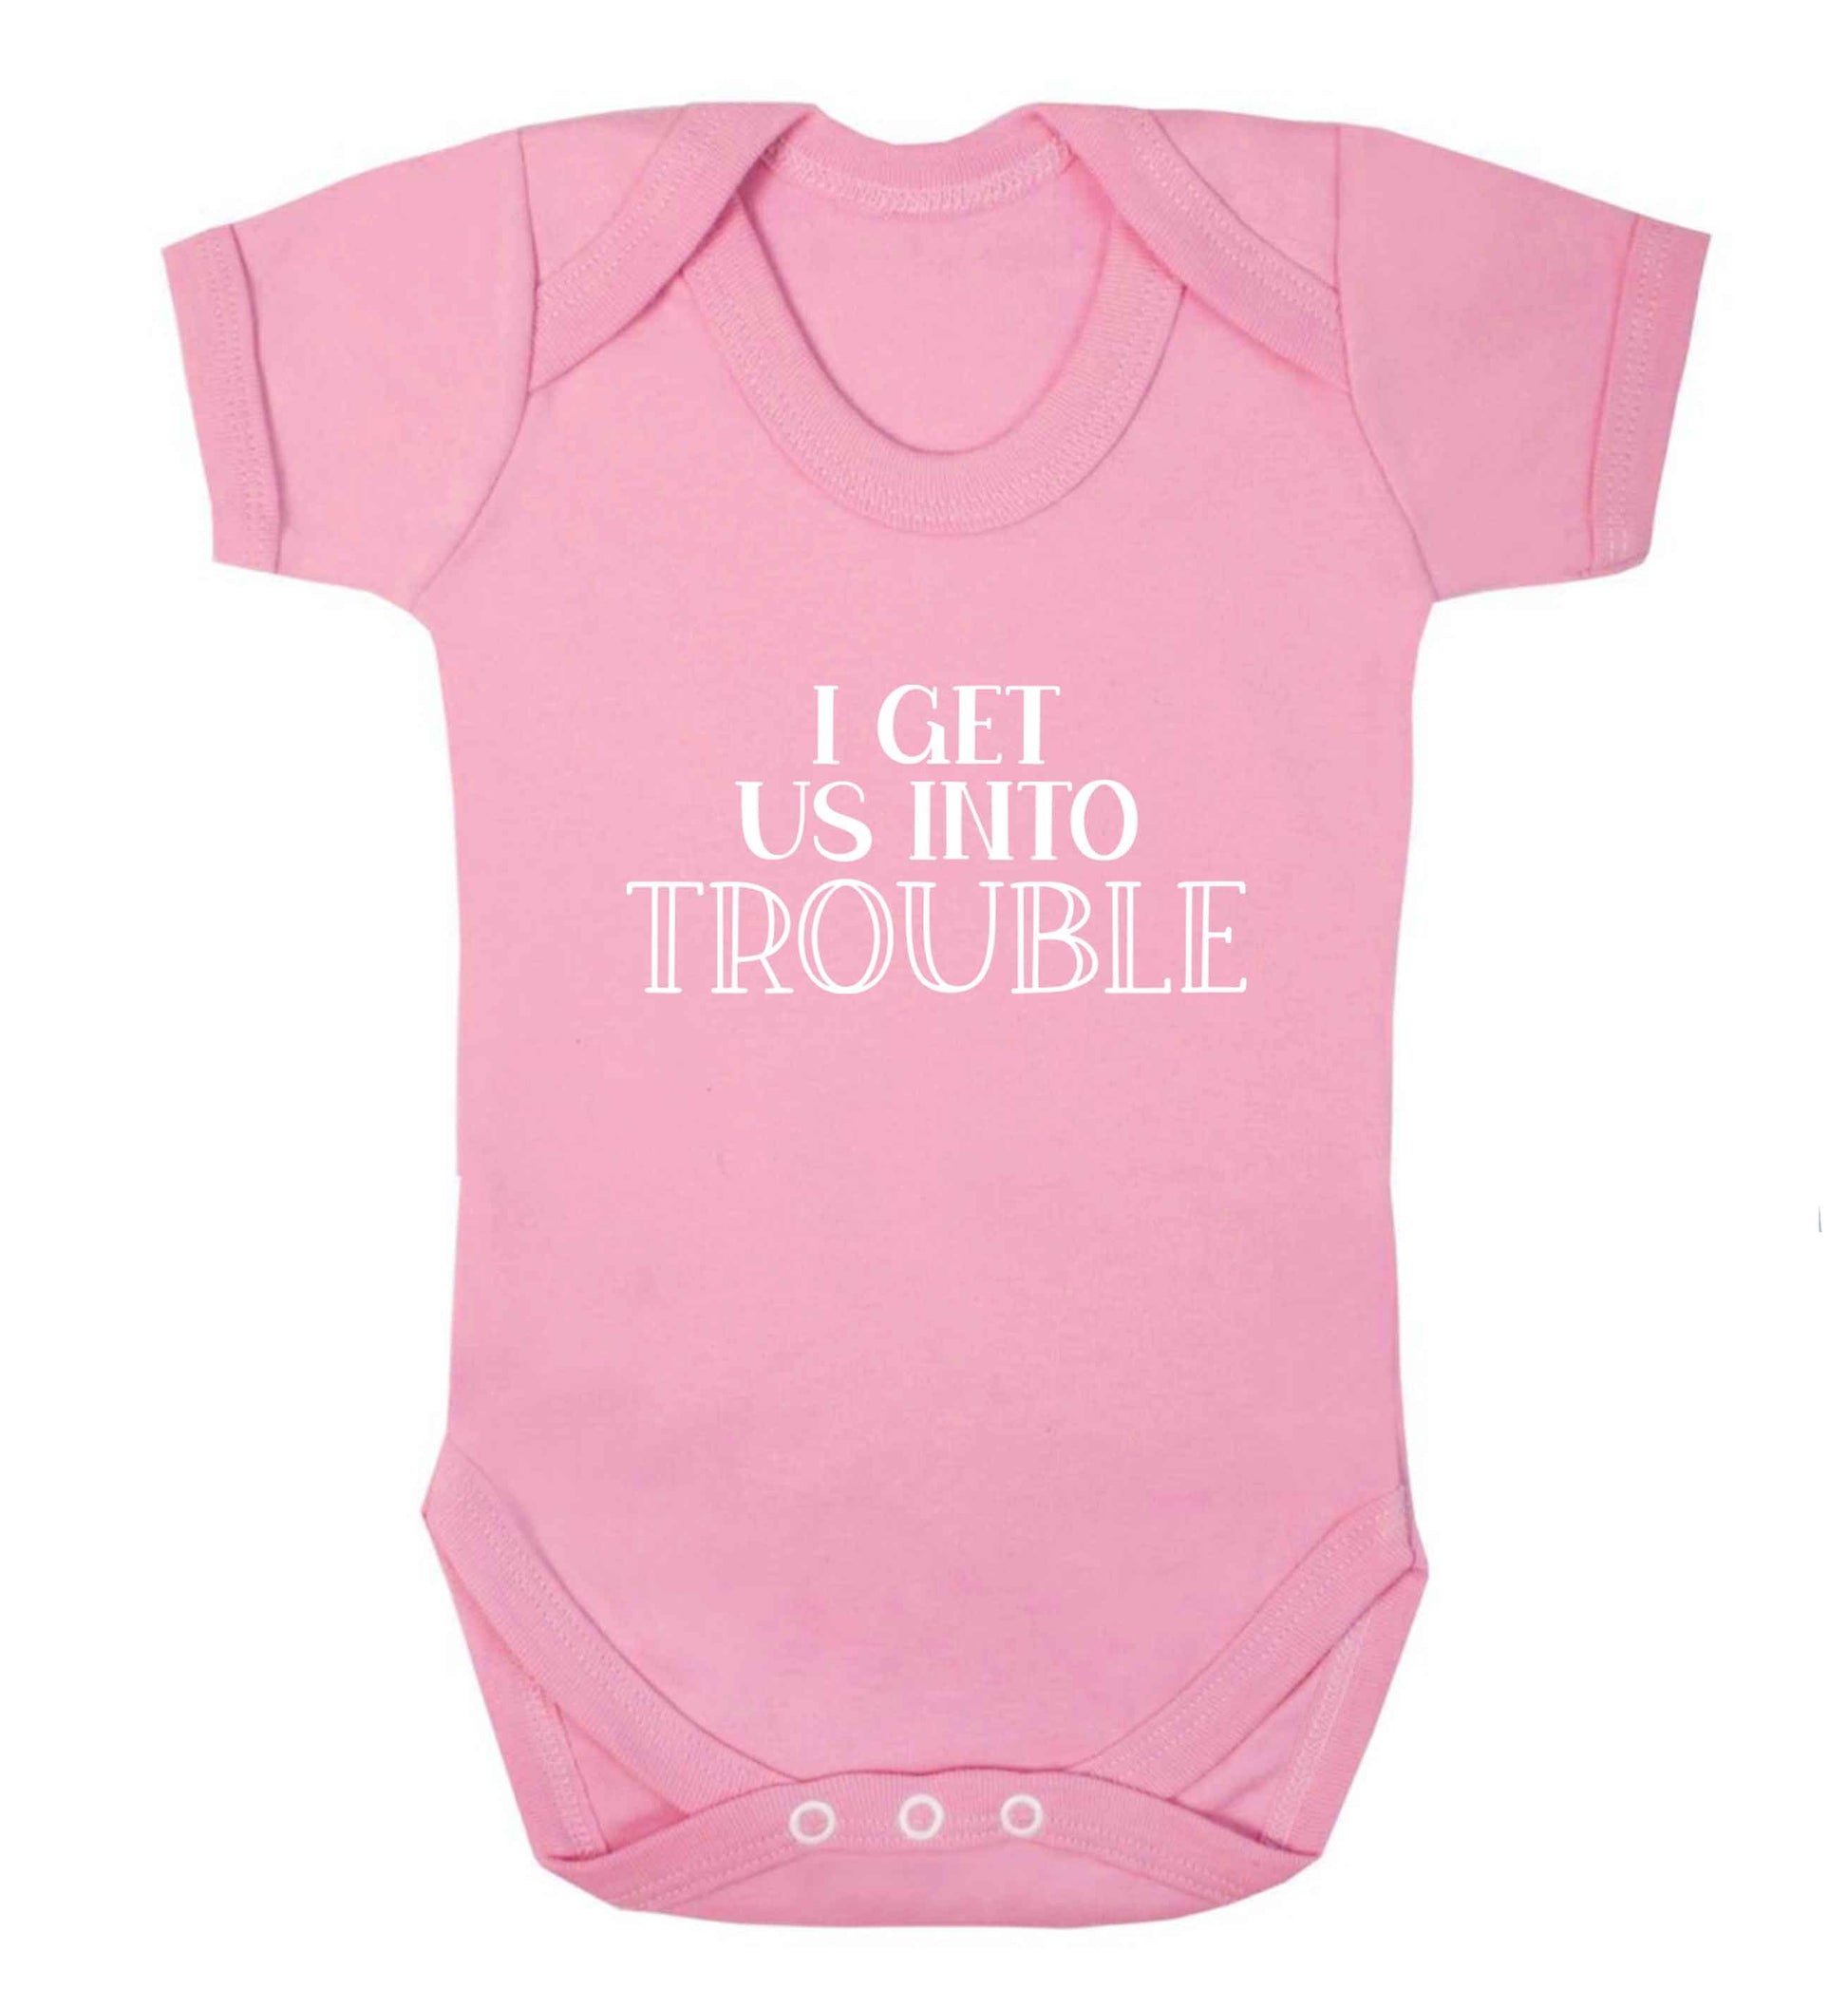 I get us into trouble baby vest pale pink 18-24 months